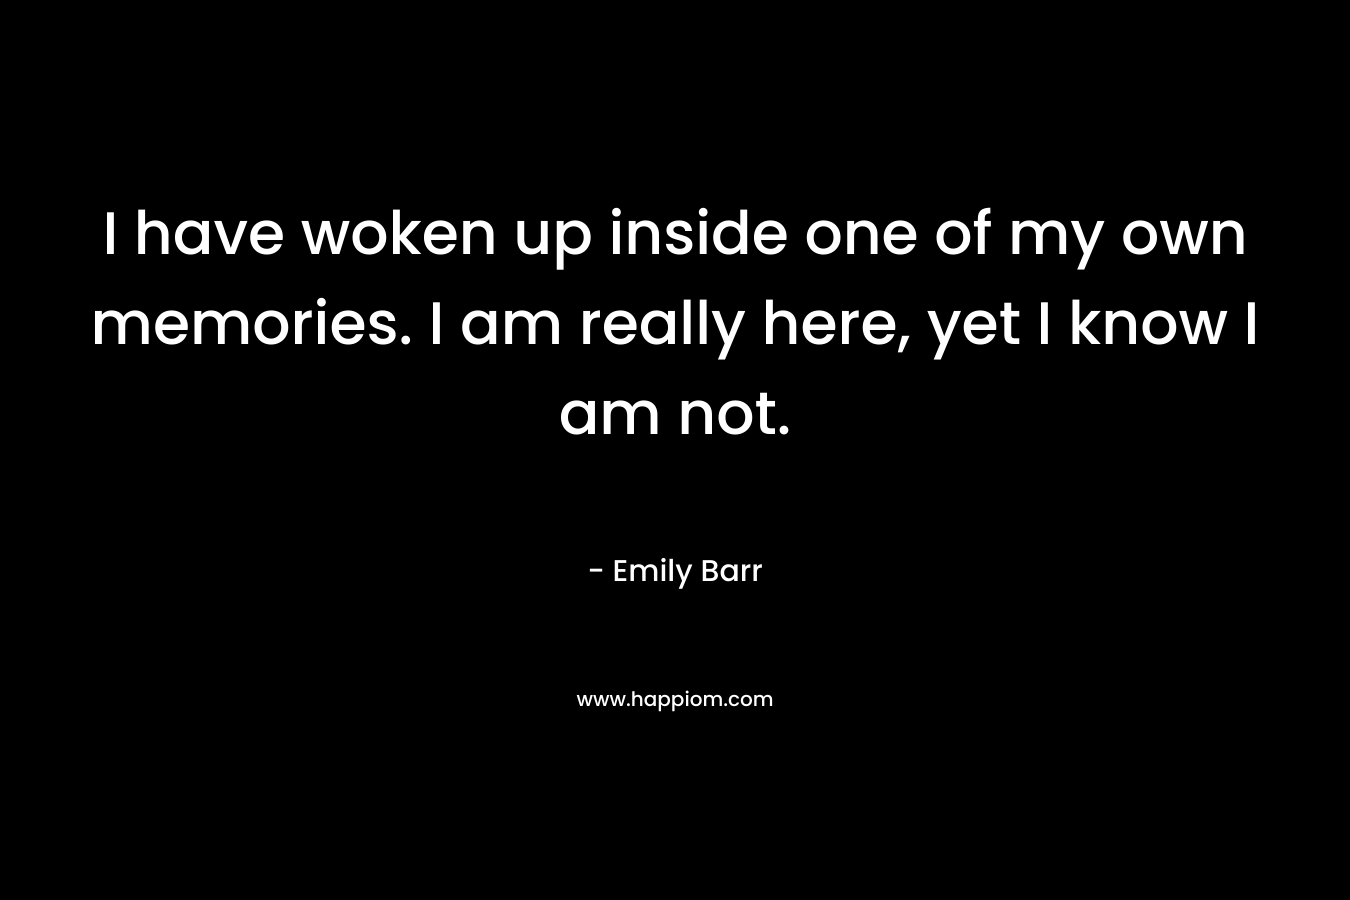 I have woken up inside one of my own memories. I am really here, yet I know I am not.